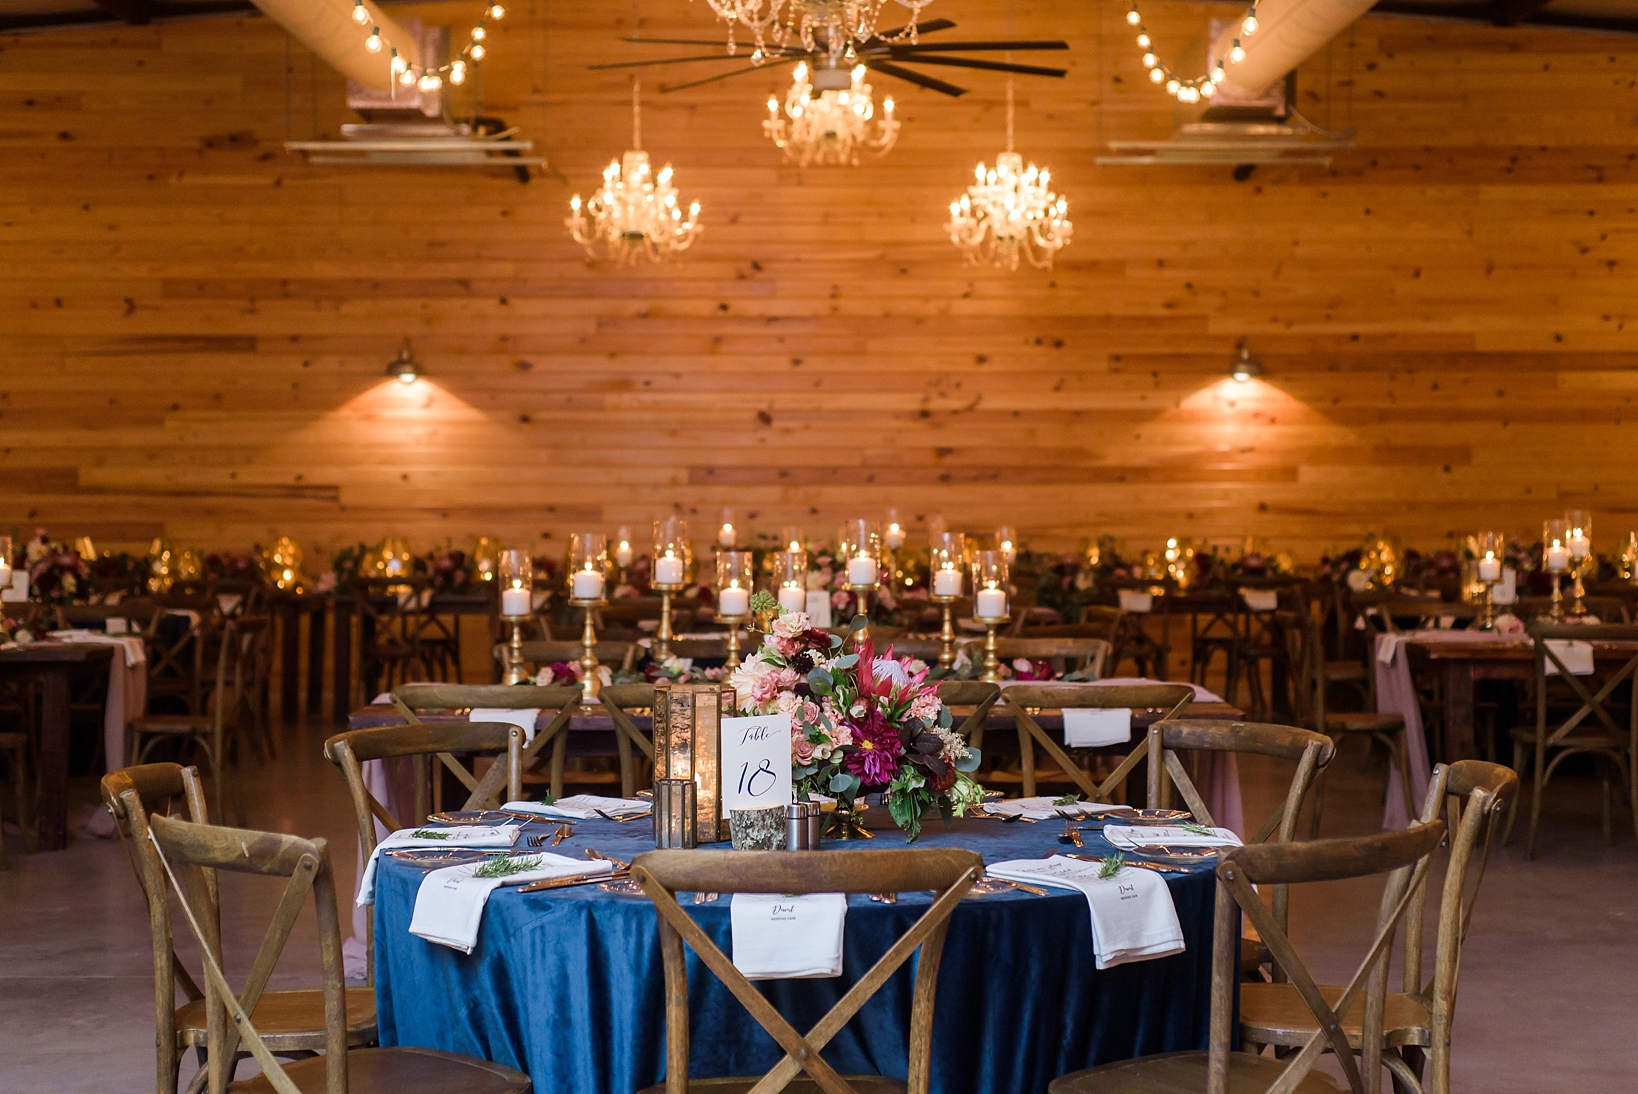 Rustic reception space with tons of details